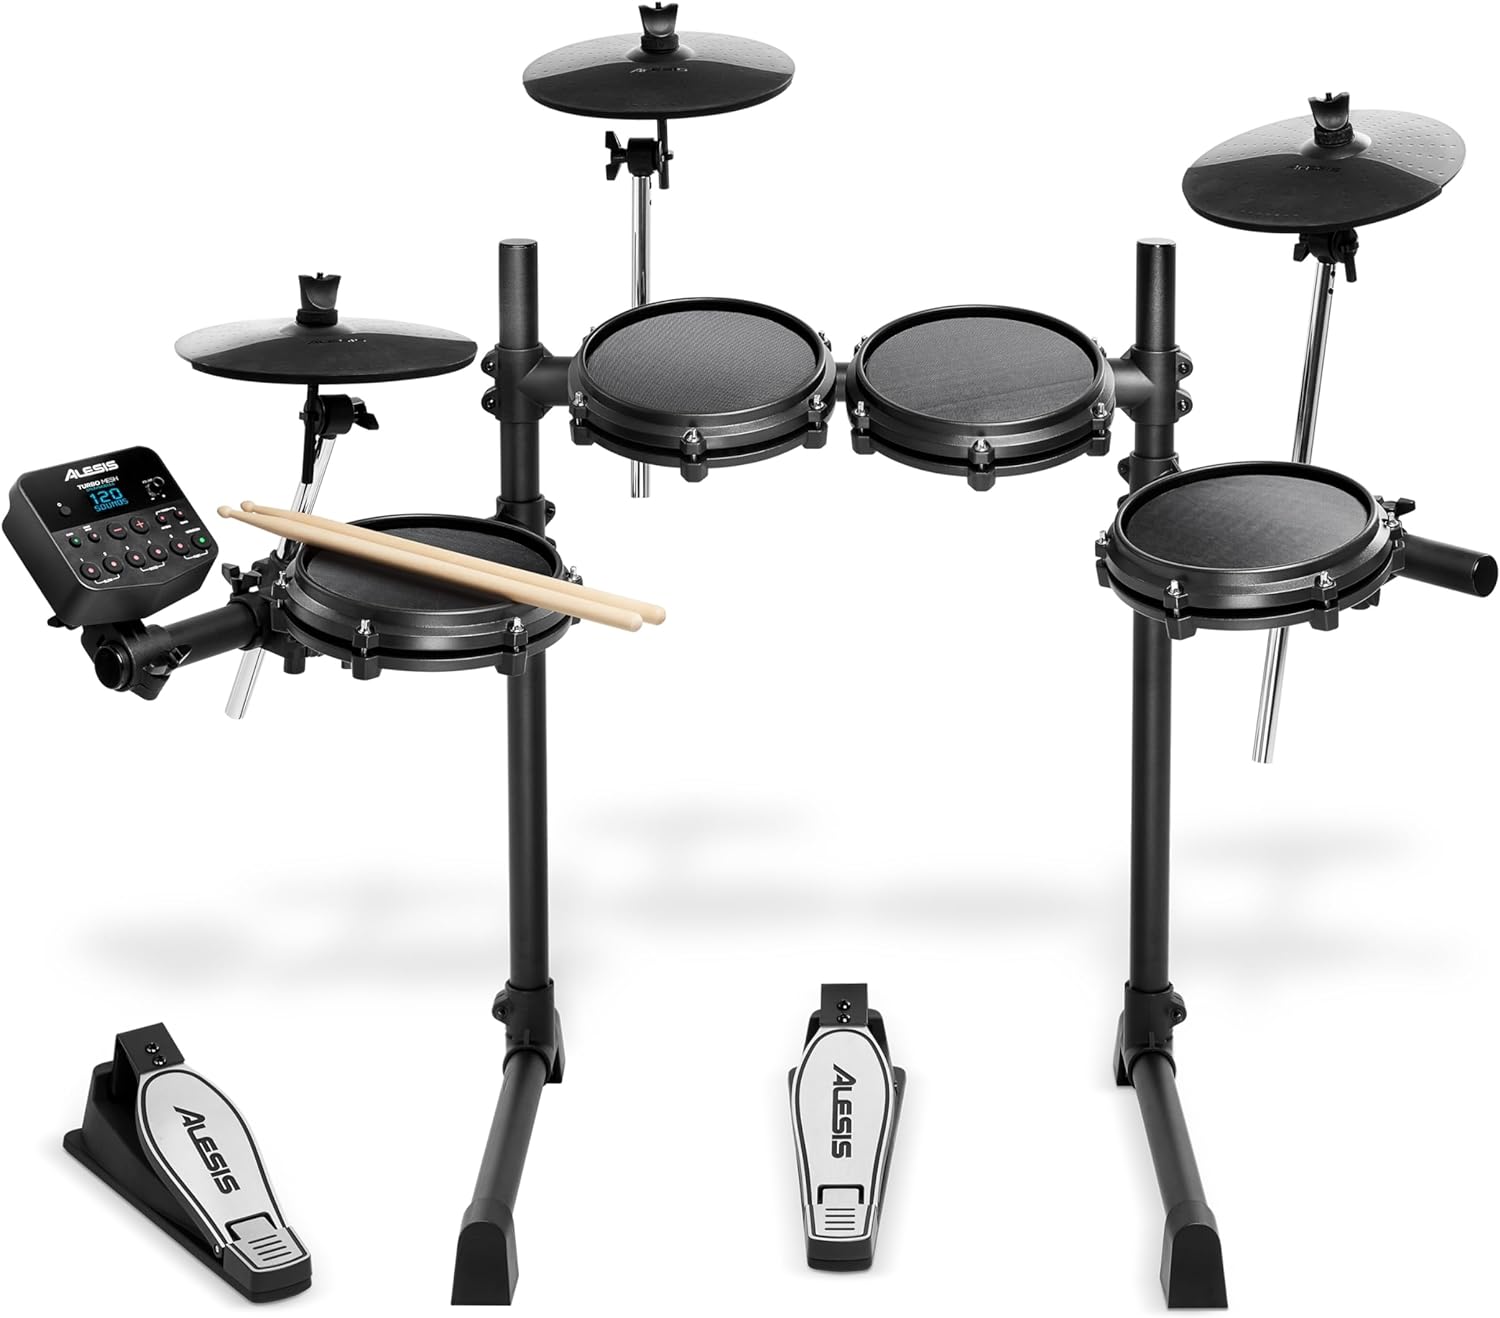 Alesis Turbo Mesh Kit Review - The Best Electric Drum Set for Modern Drummers